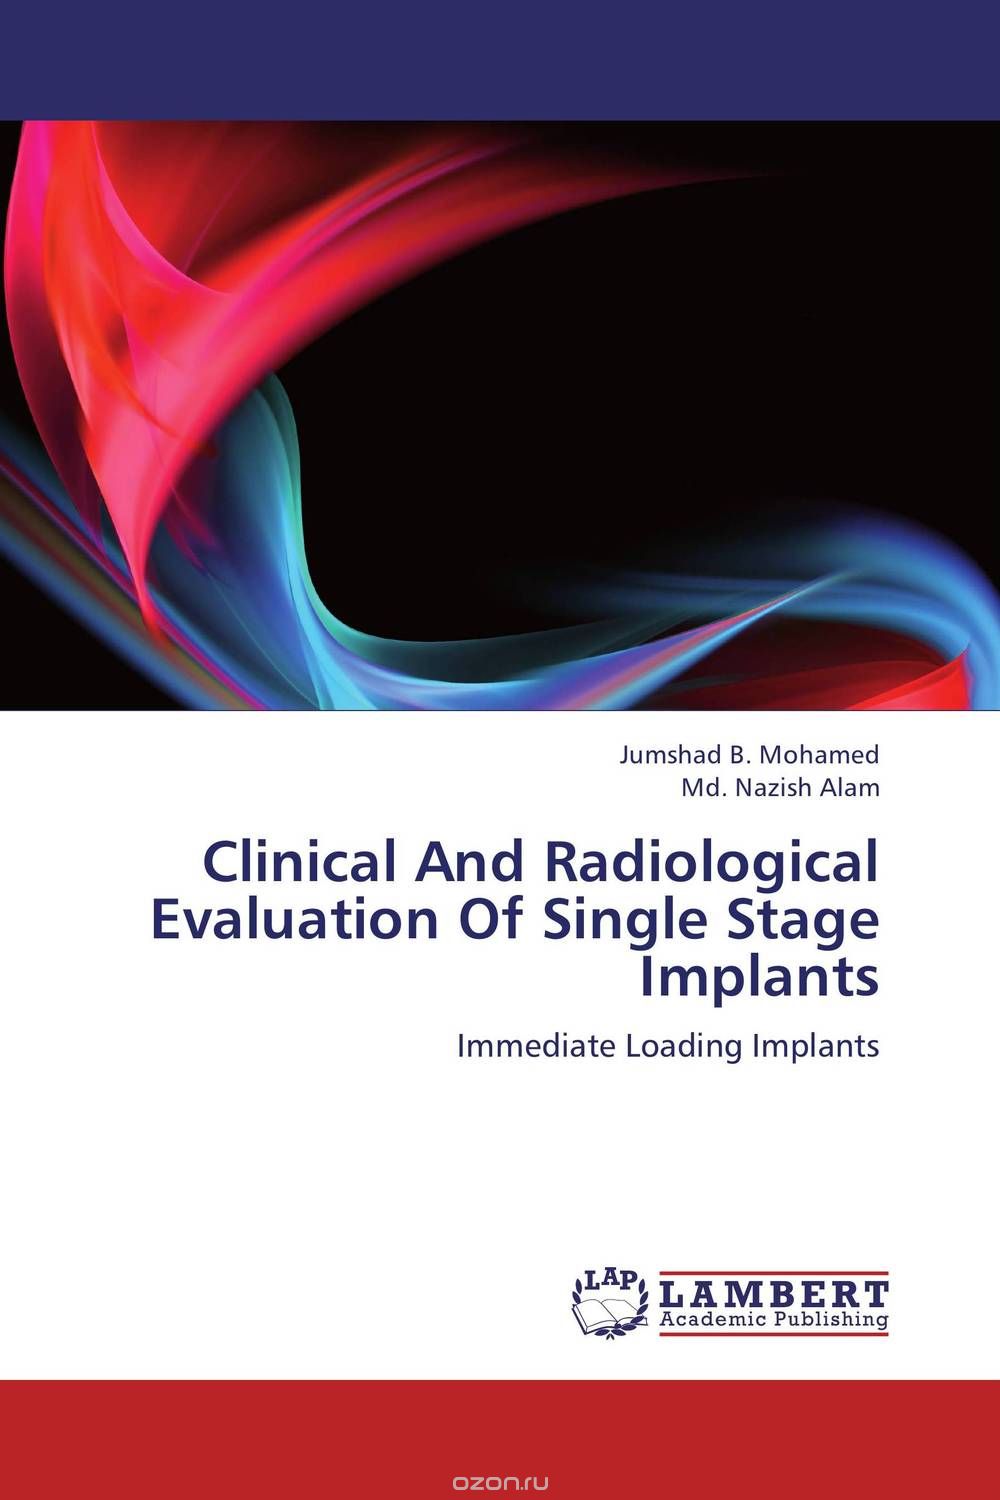 Clinical And Radiological Evaluation Of Single Stage Implants